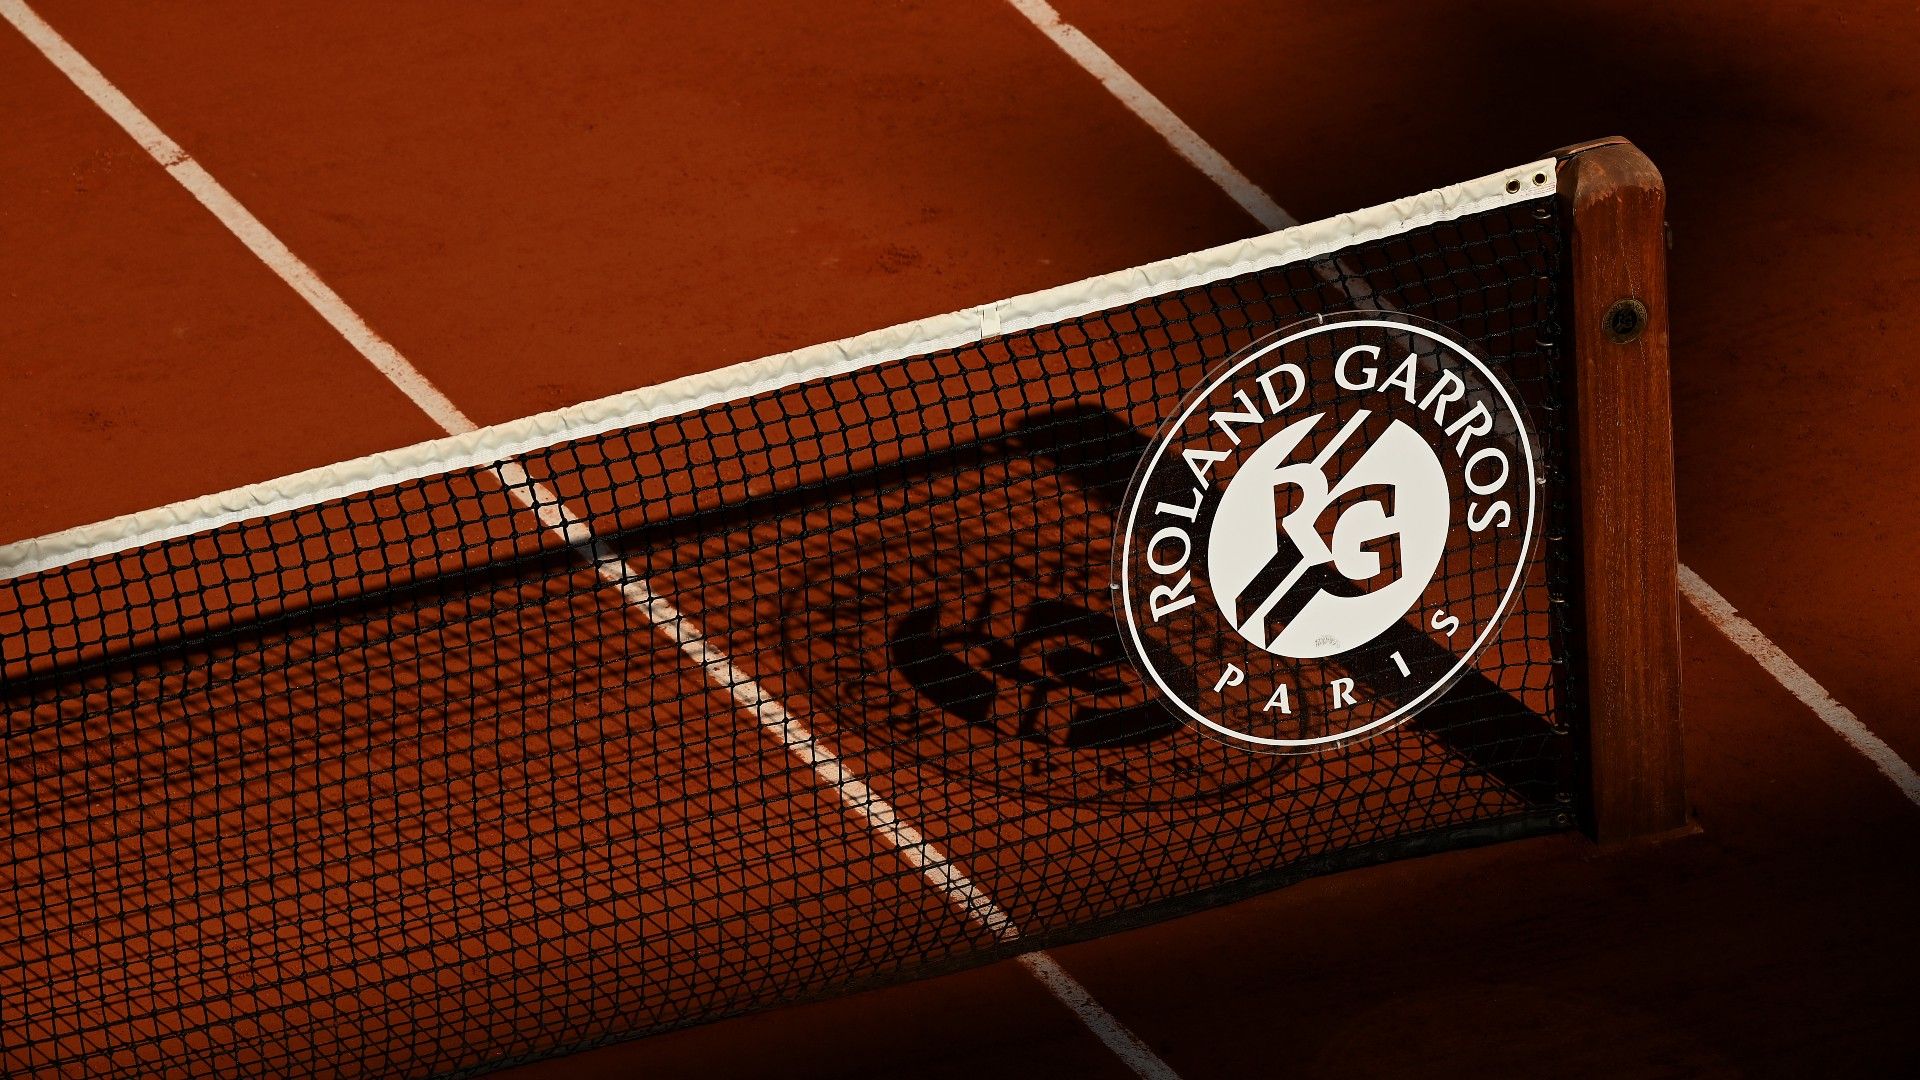 French Open schedule 2021: Full draws, TV coverage, channels & more to watch every tennis match. Sporting News Canada